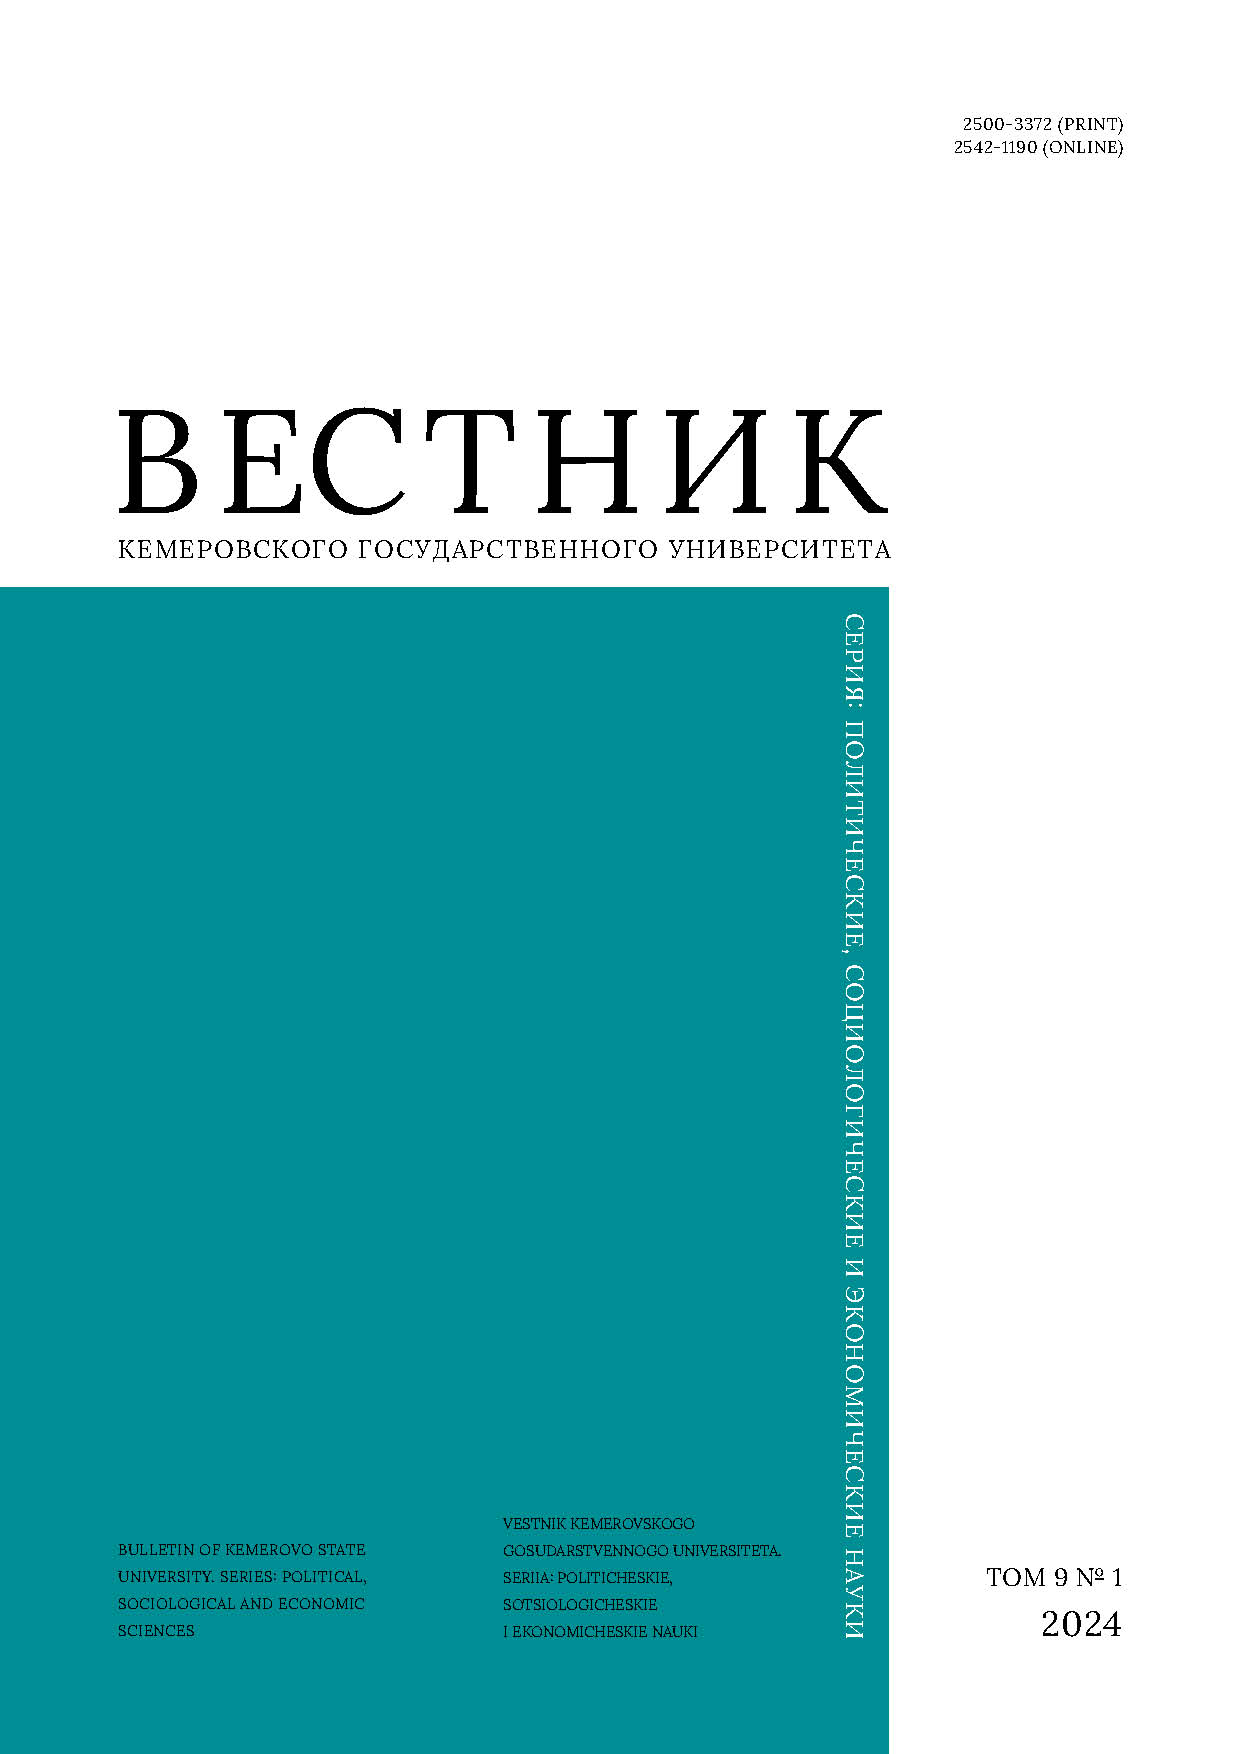                         Implementation of Patient-Oriented Approach to the Health Care Development in Kemerovo Region – Kuzbass: Strategic Analysis
            